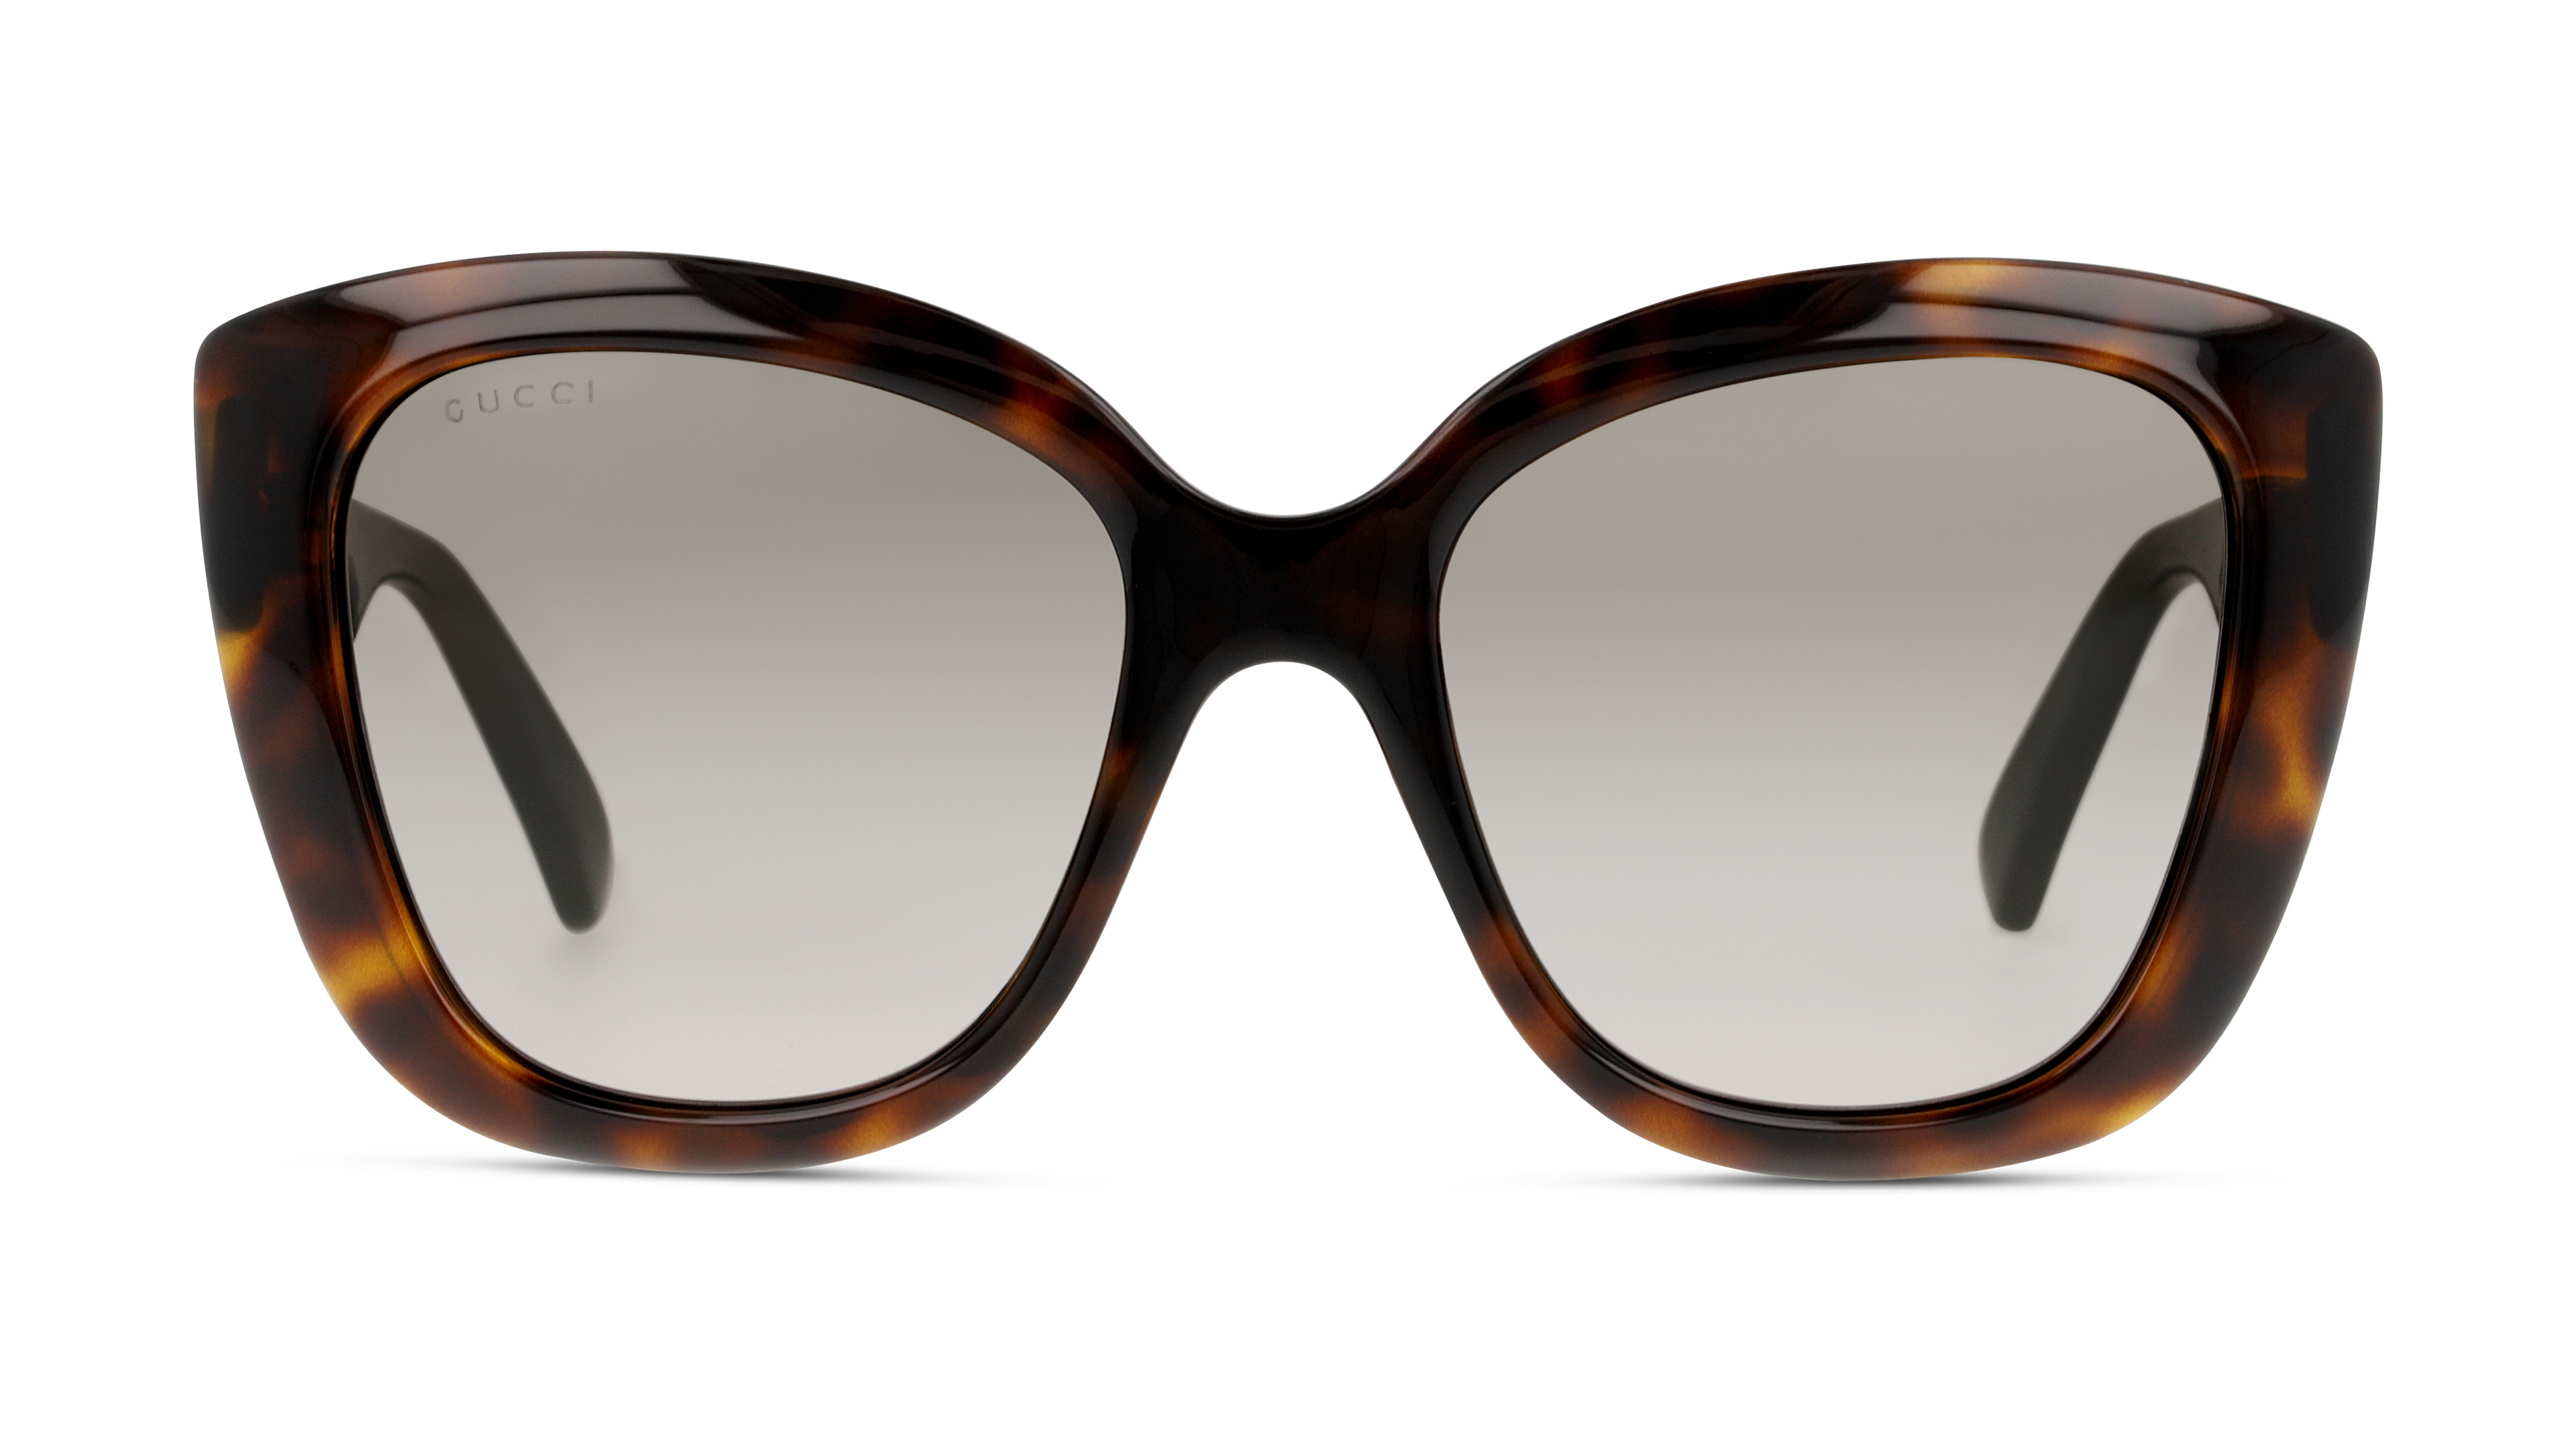 [products.image.front] Gucci GG0860S 001 Sonnenbrille